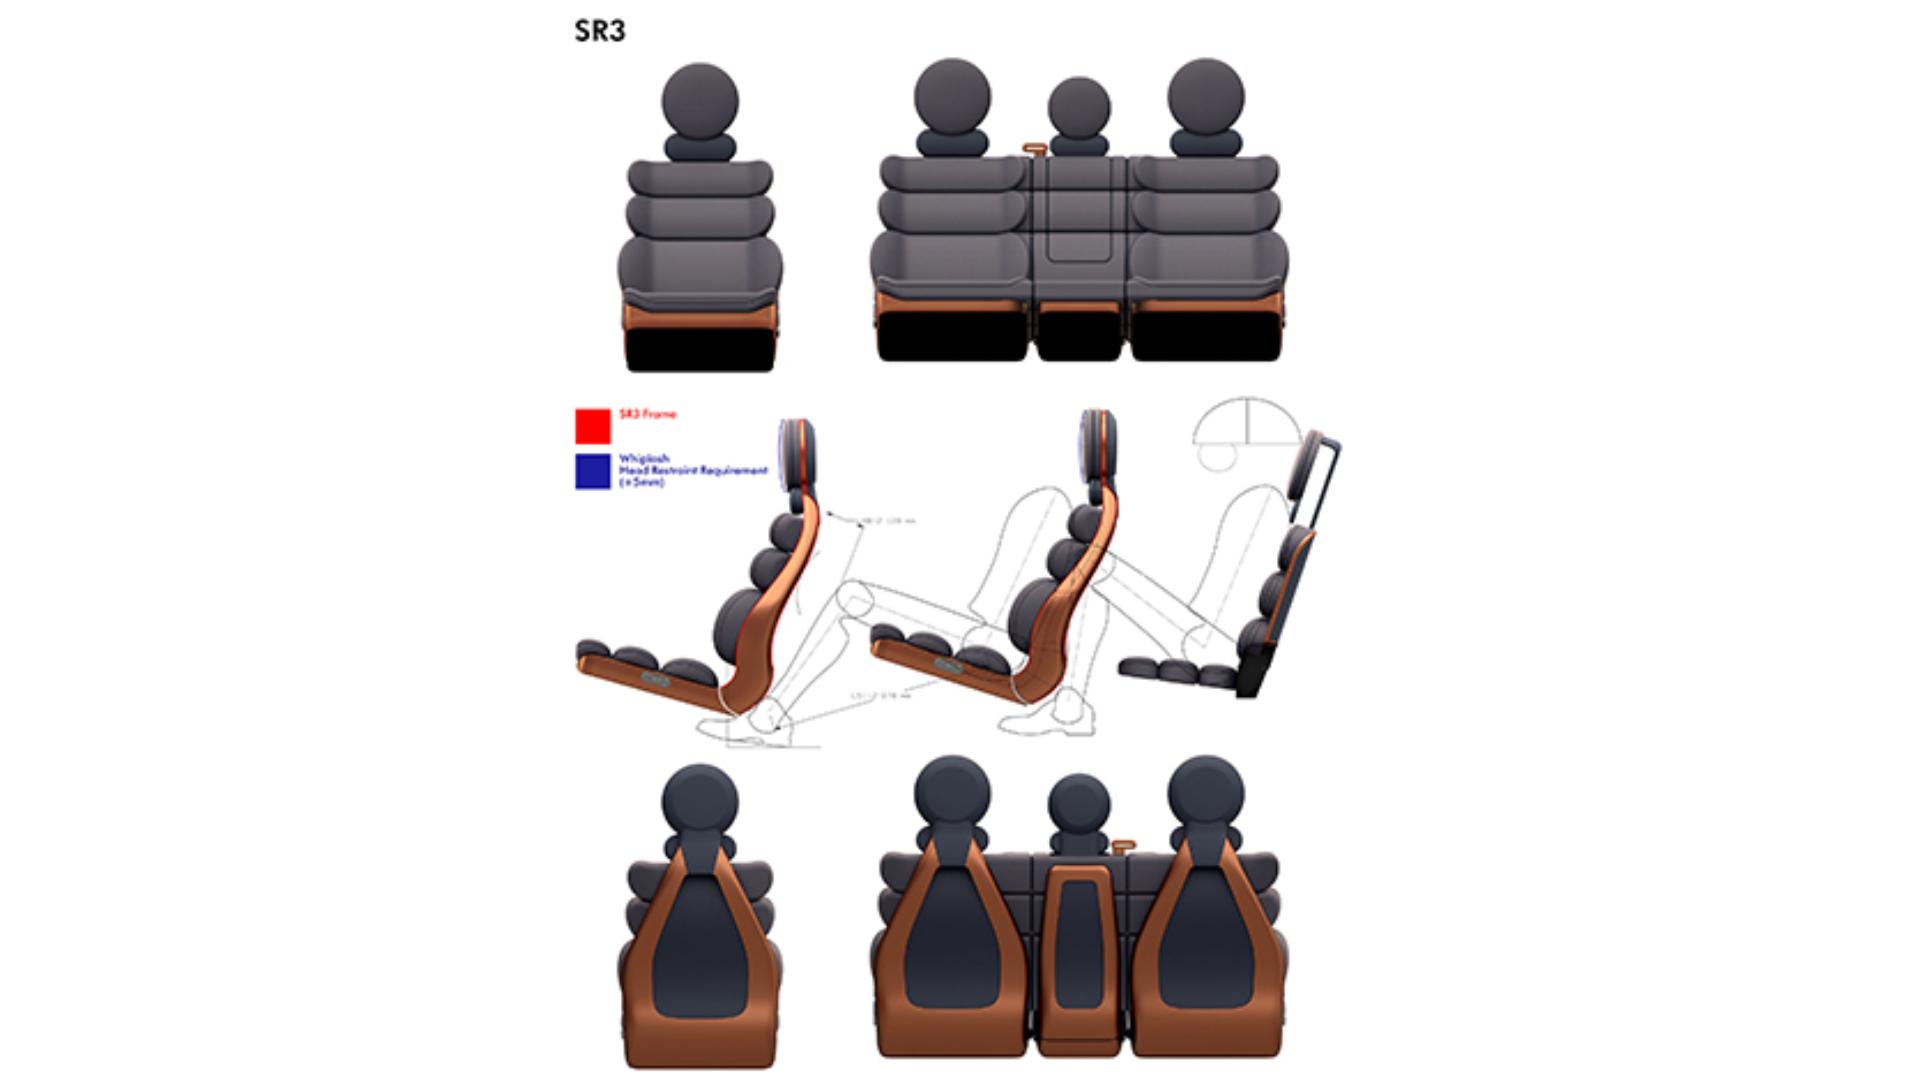 Images of various seat designs for the car